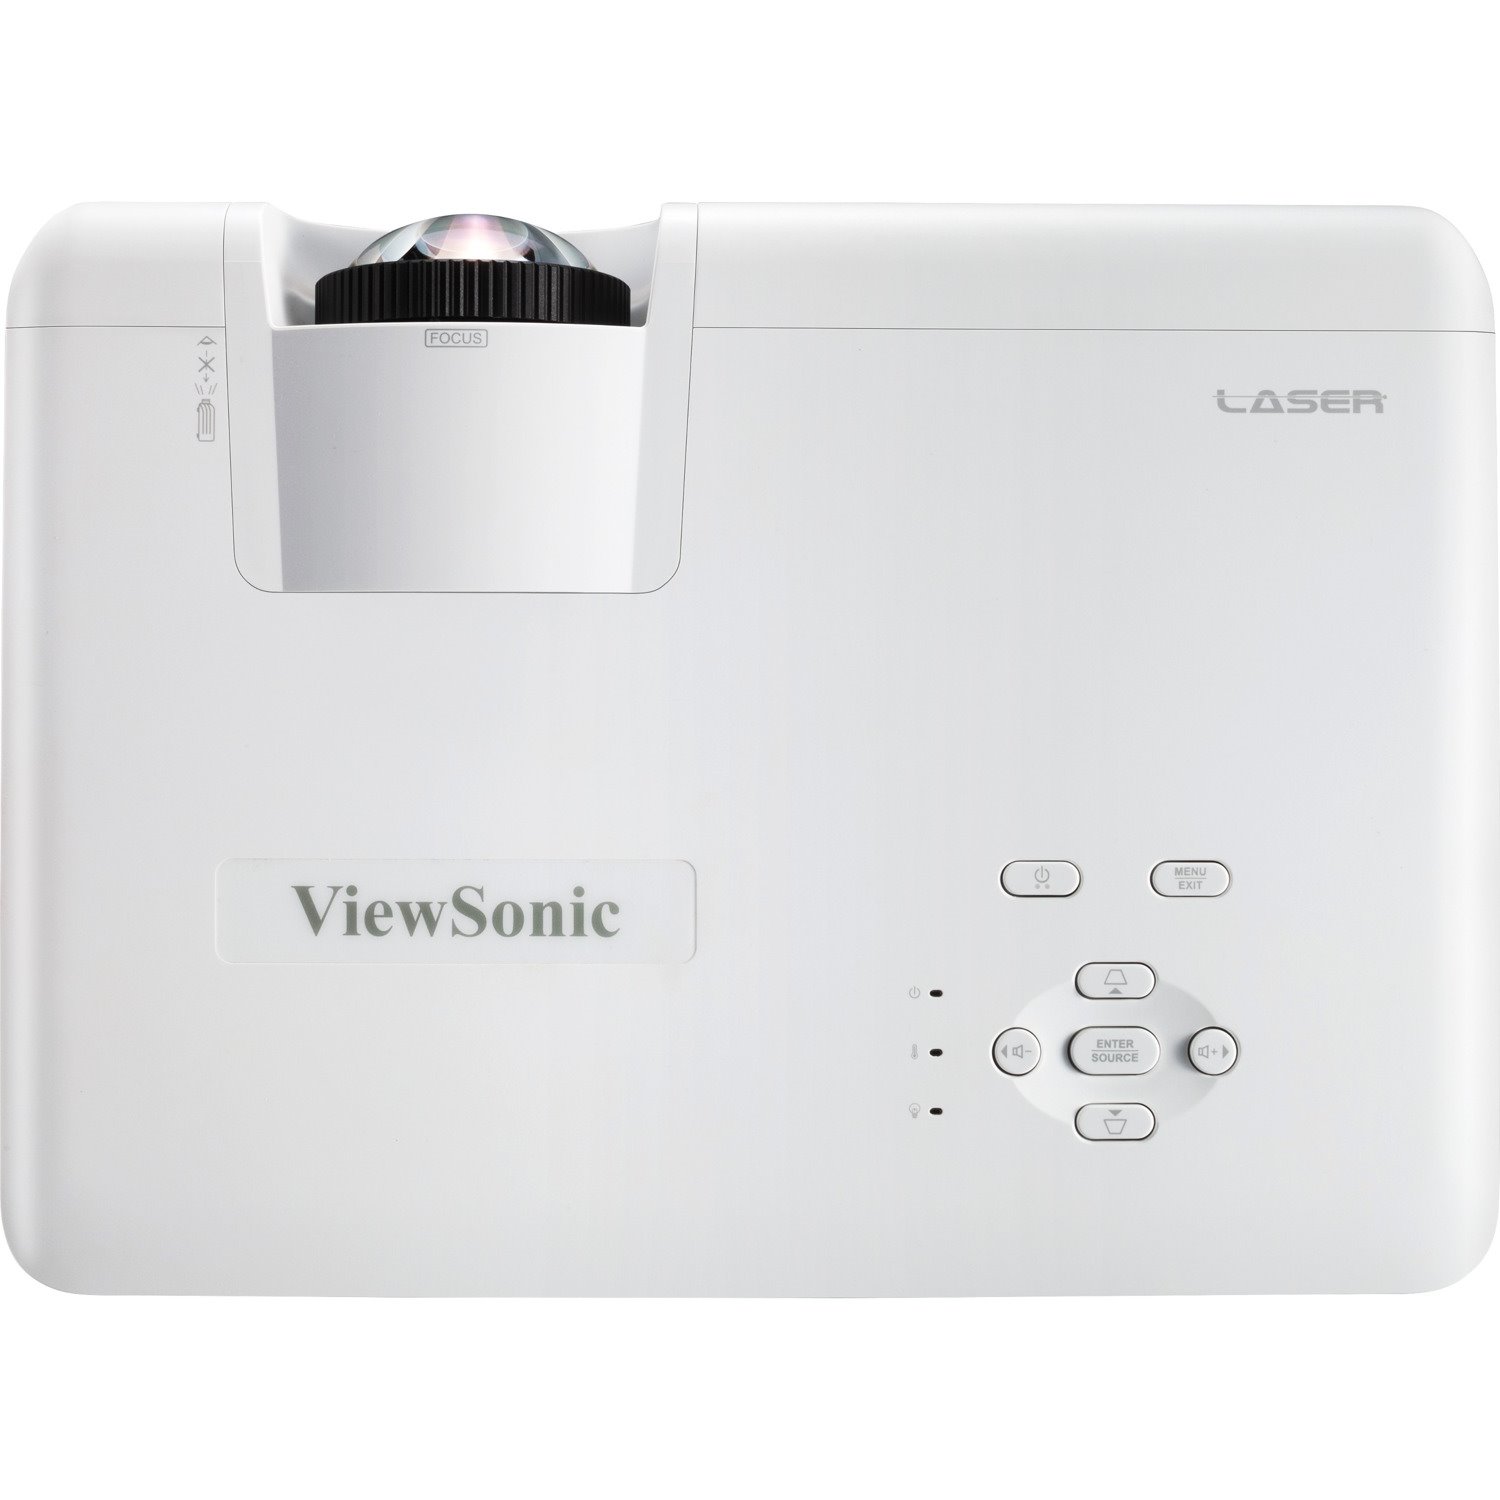 ViewSonic LS625X 3200 Lumens DLP XGA Short Throw Laser Projector with Horizontal and Vertical Keystone Correction and LAN Control